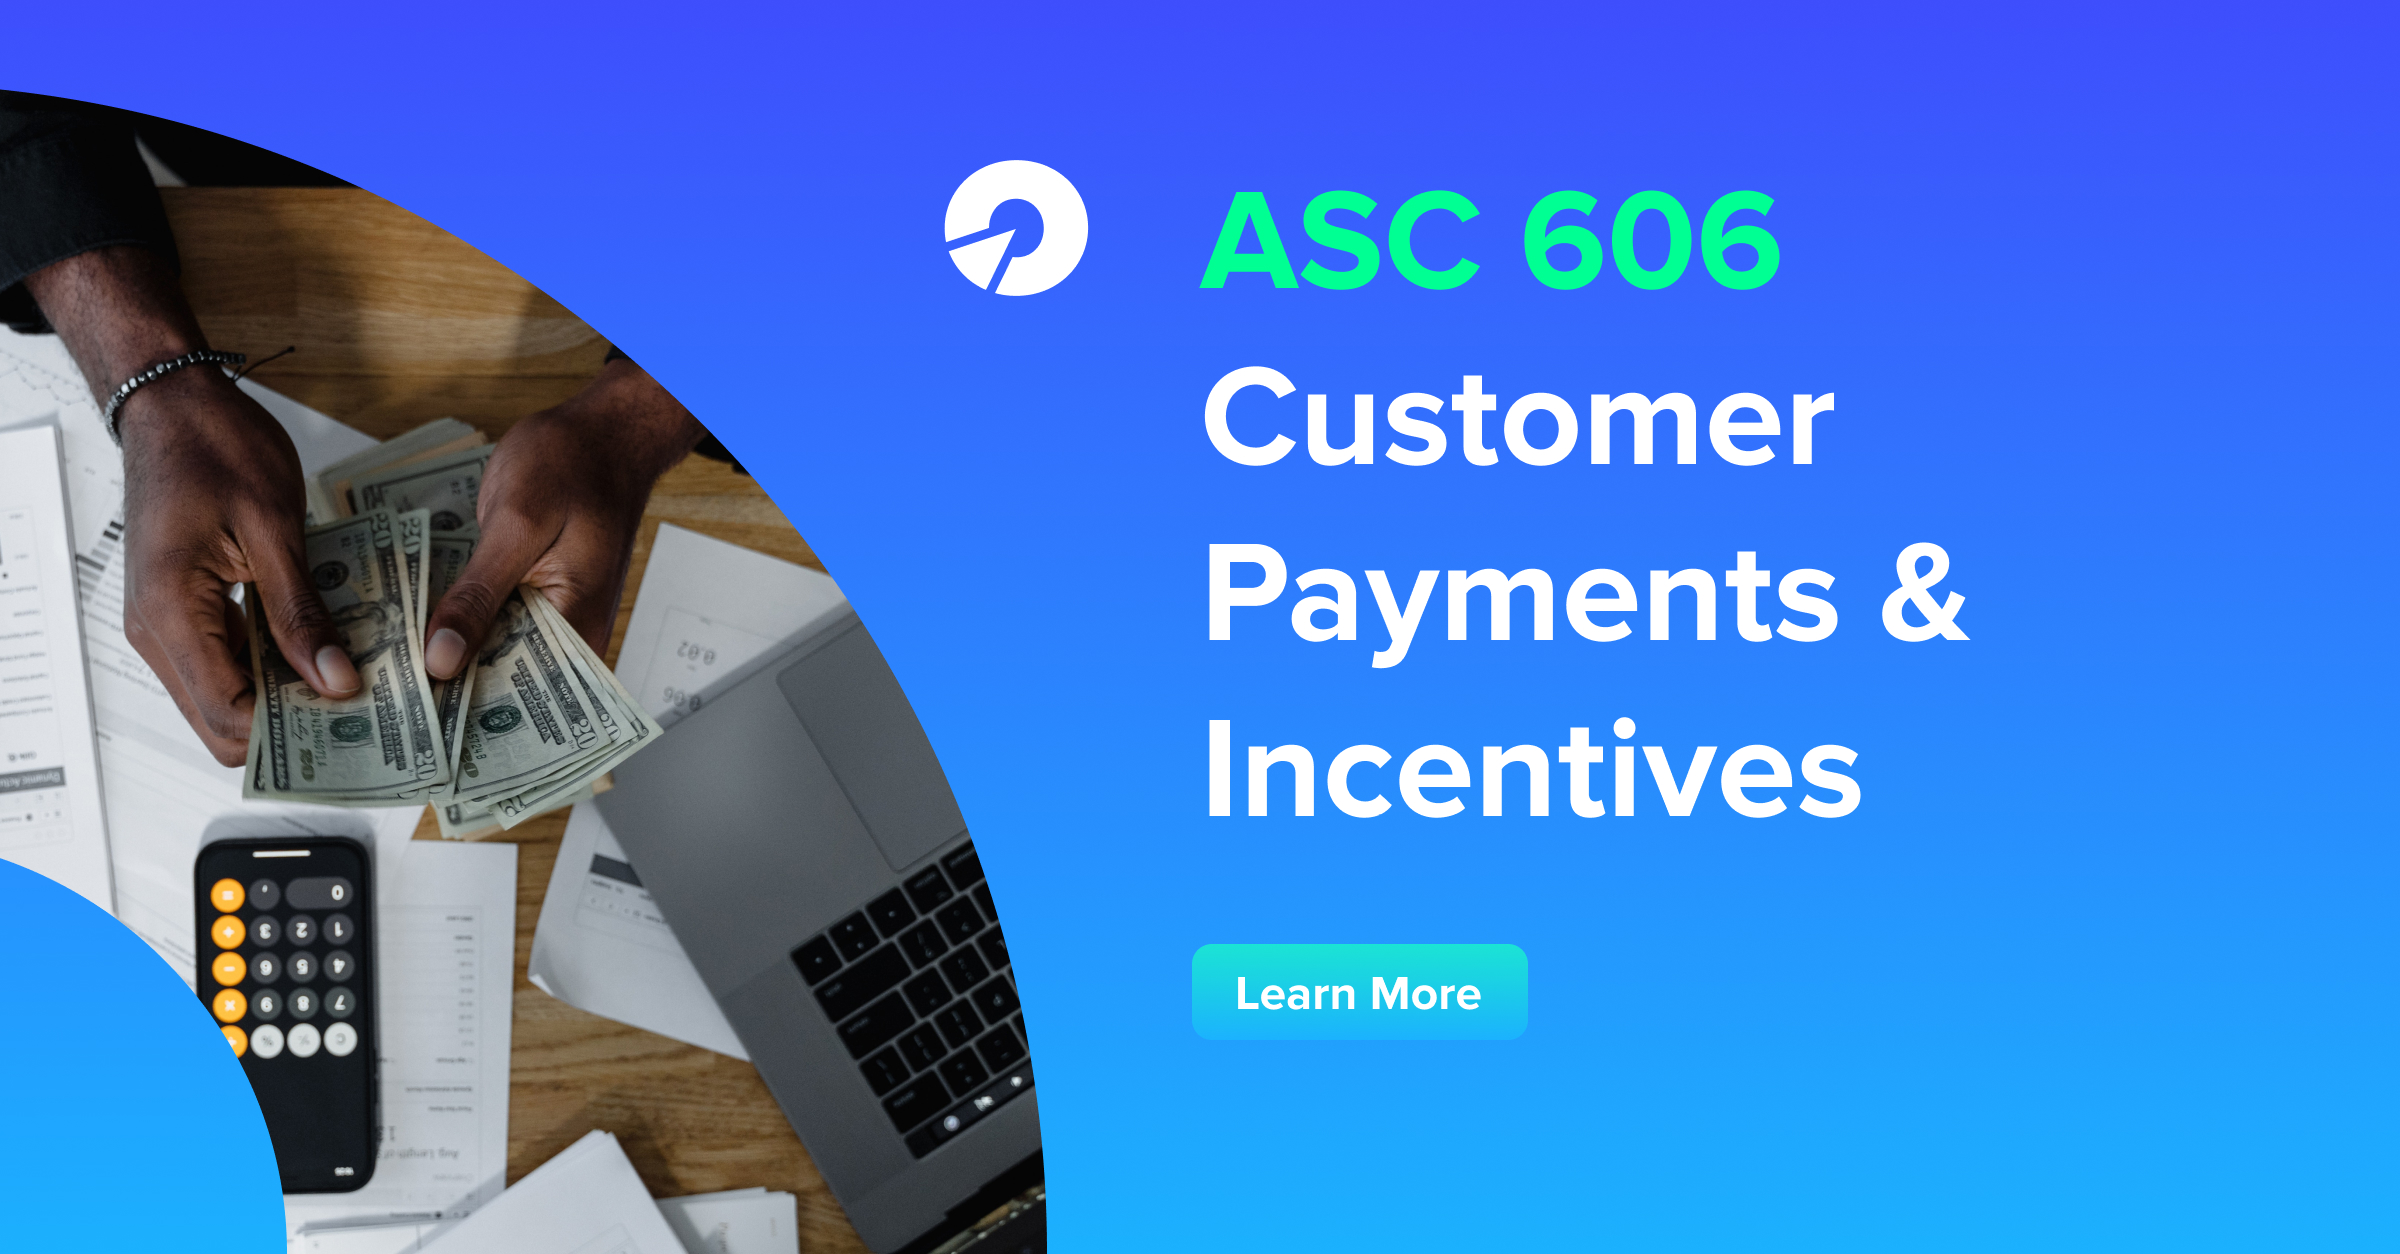 ASC 606 Customer Payments & Incentives